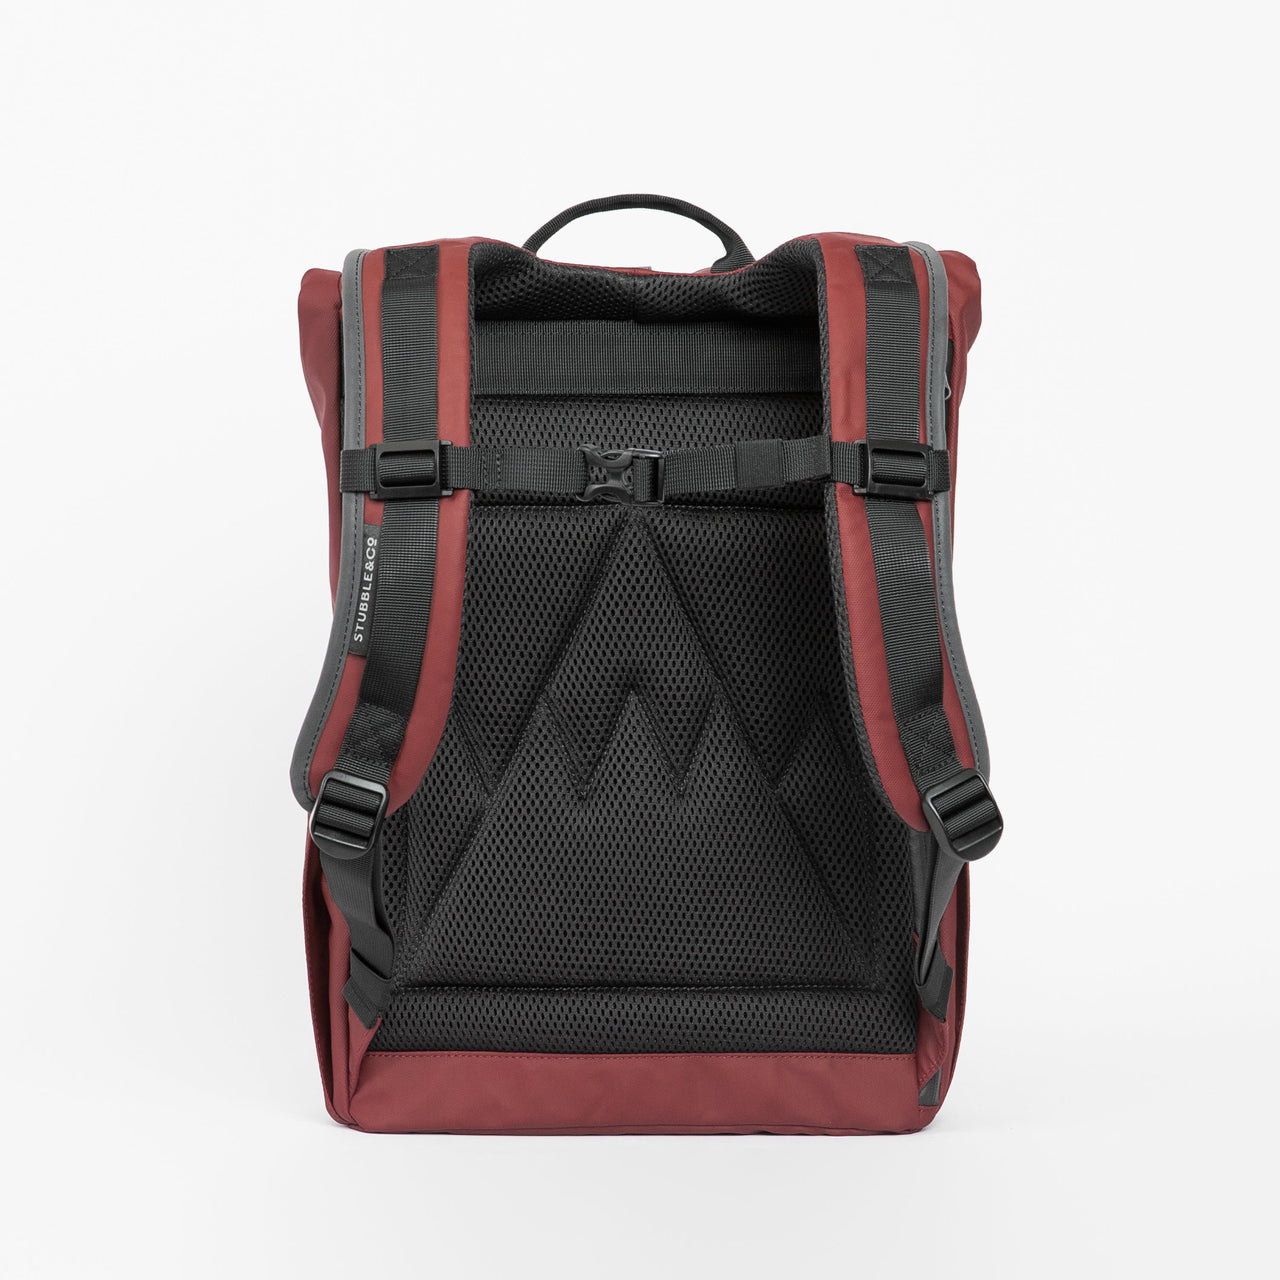 Roll Top Mini backpack in Earth Red